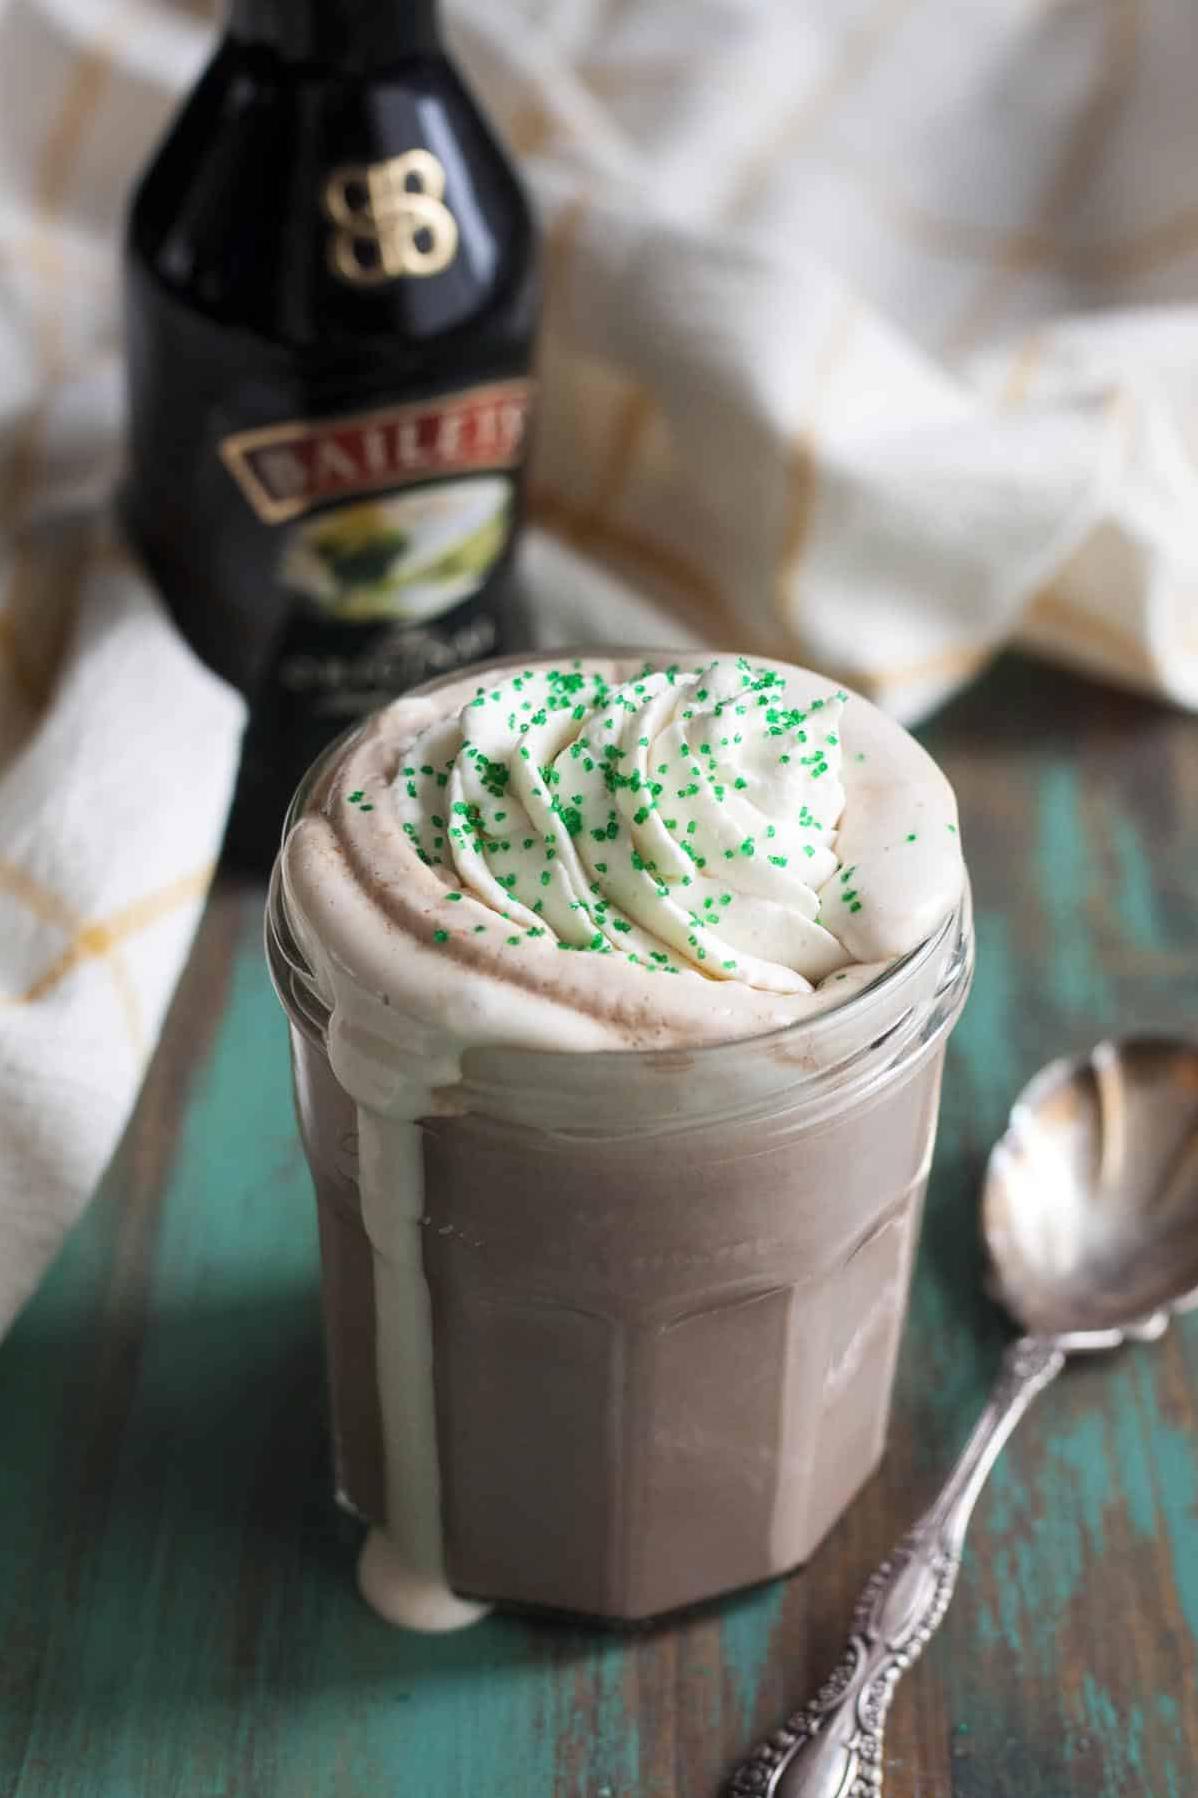  A dessert recipe that will make your Guinness extra enjoyable.